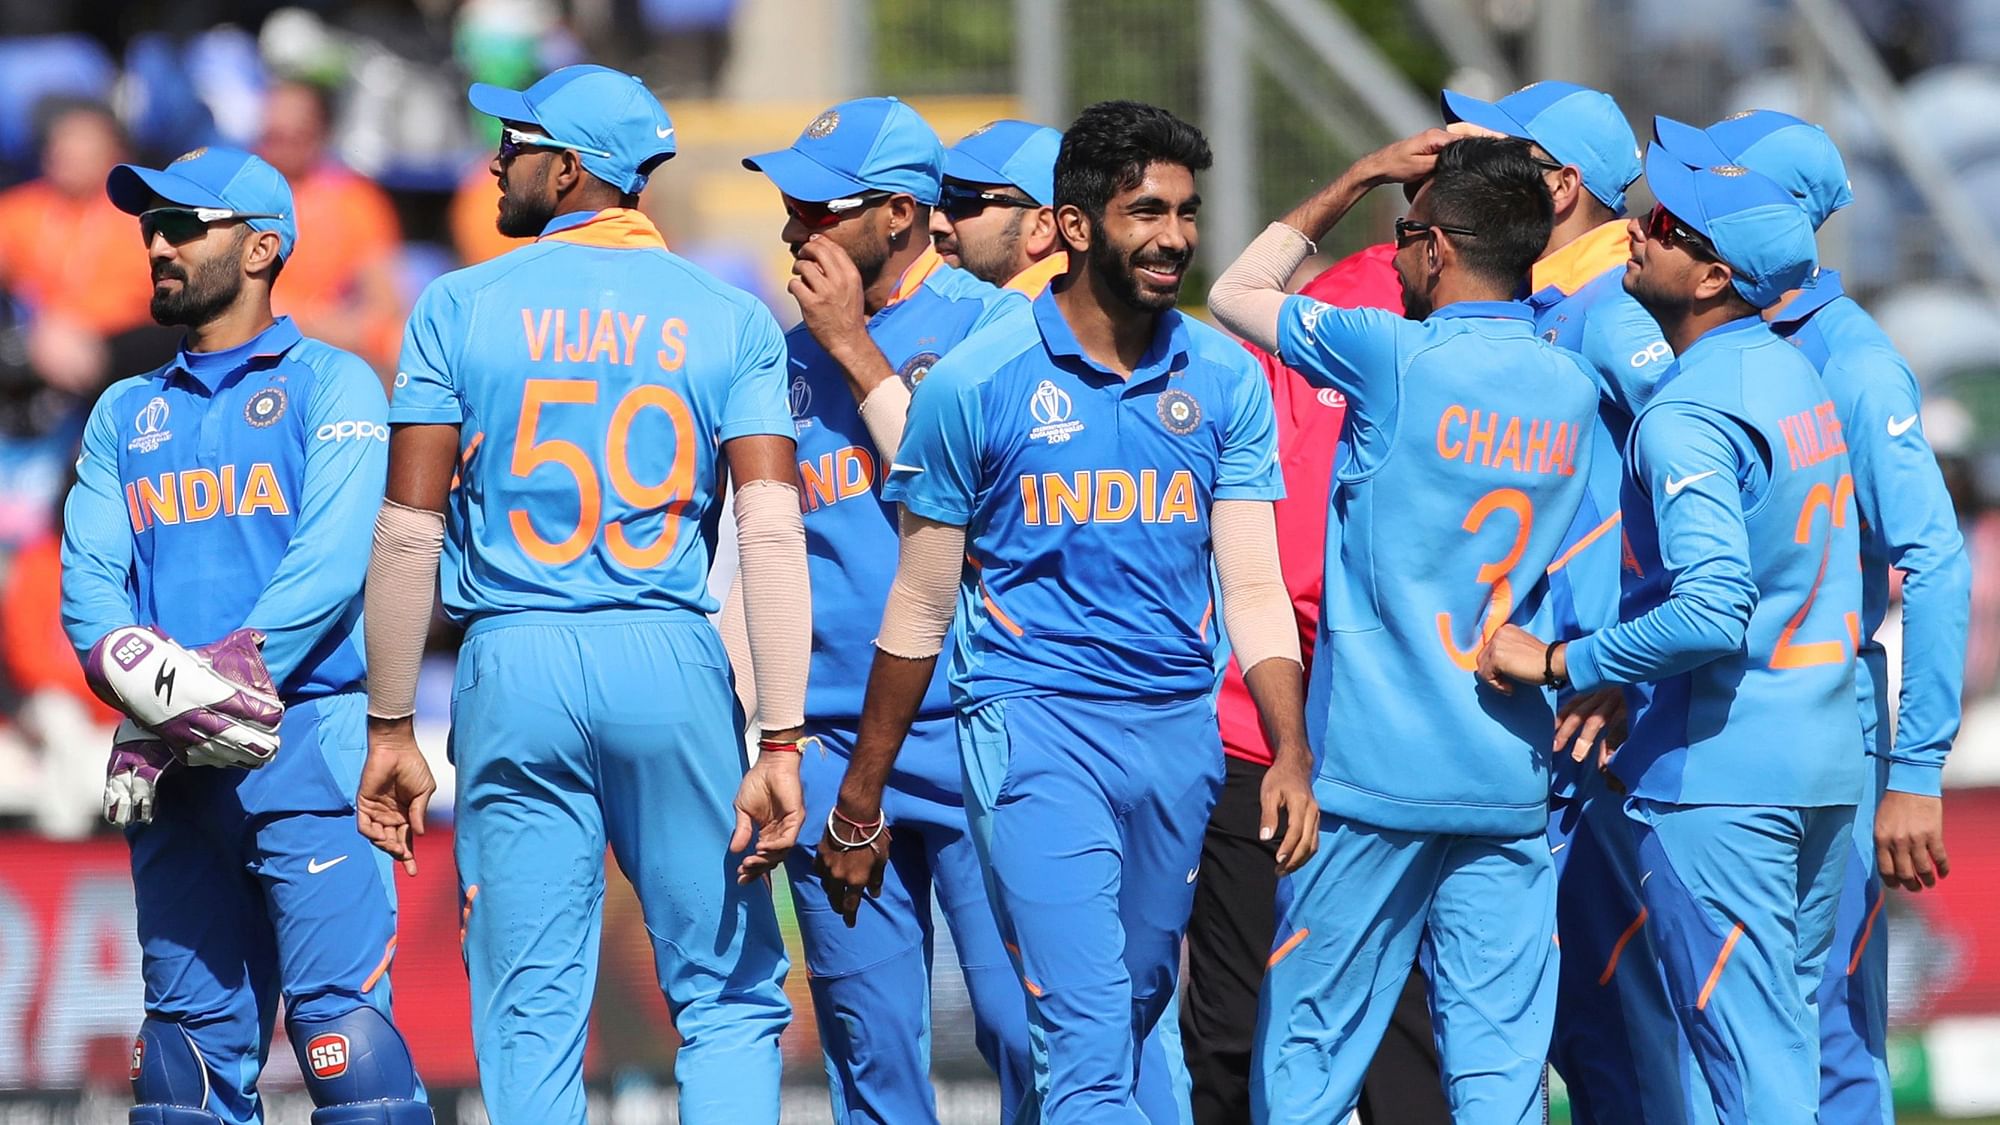 India’ s full schedule at the ICC World Cup 2019 being played in England and Wales.